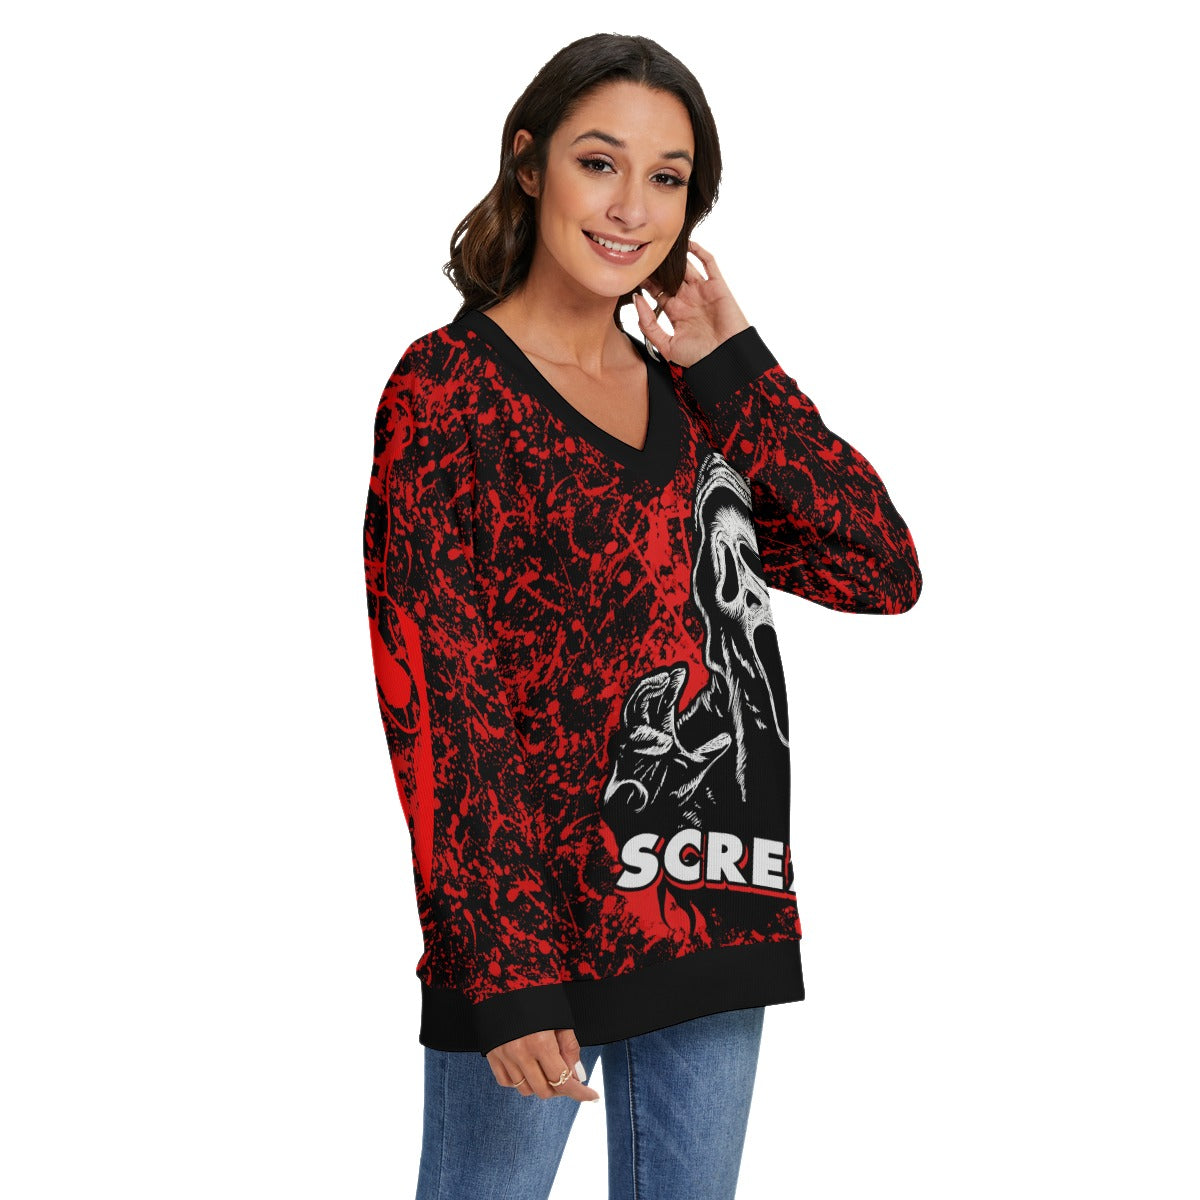 ghostface V-neck Knitted Sweater spookydoll